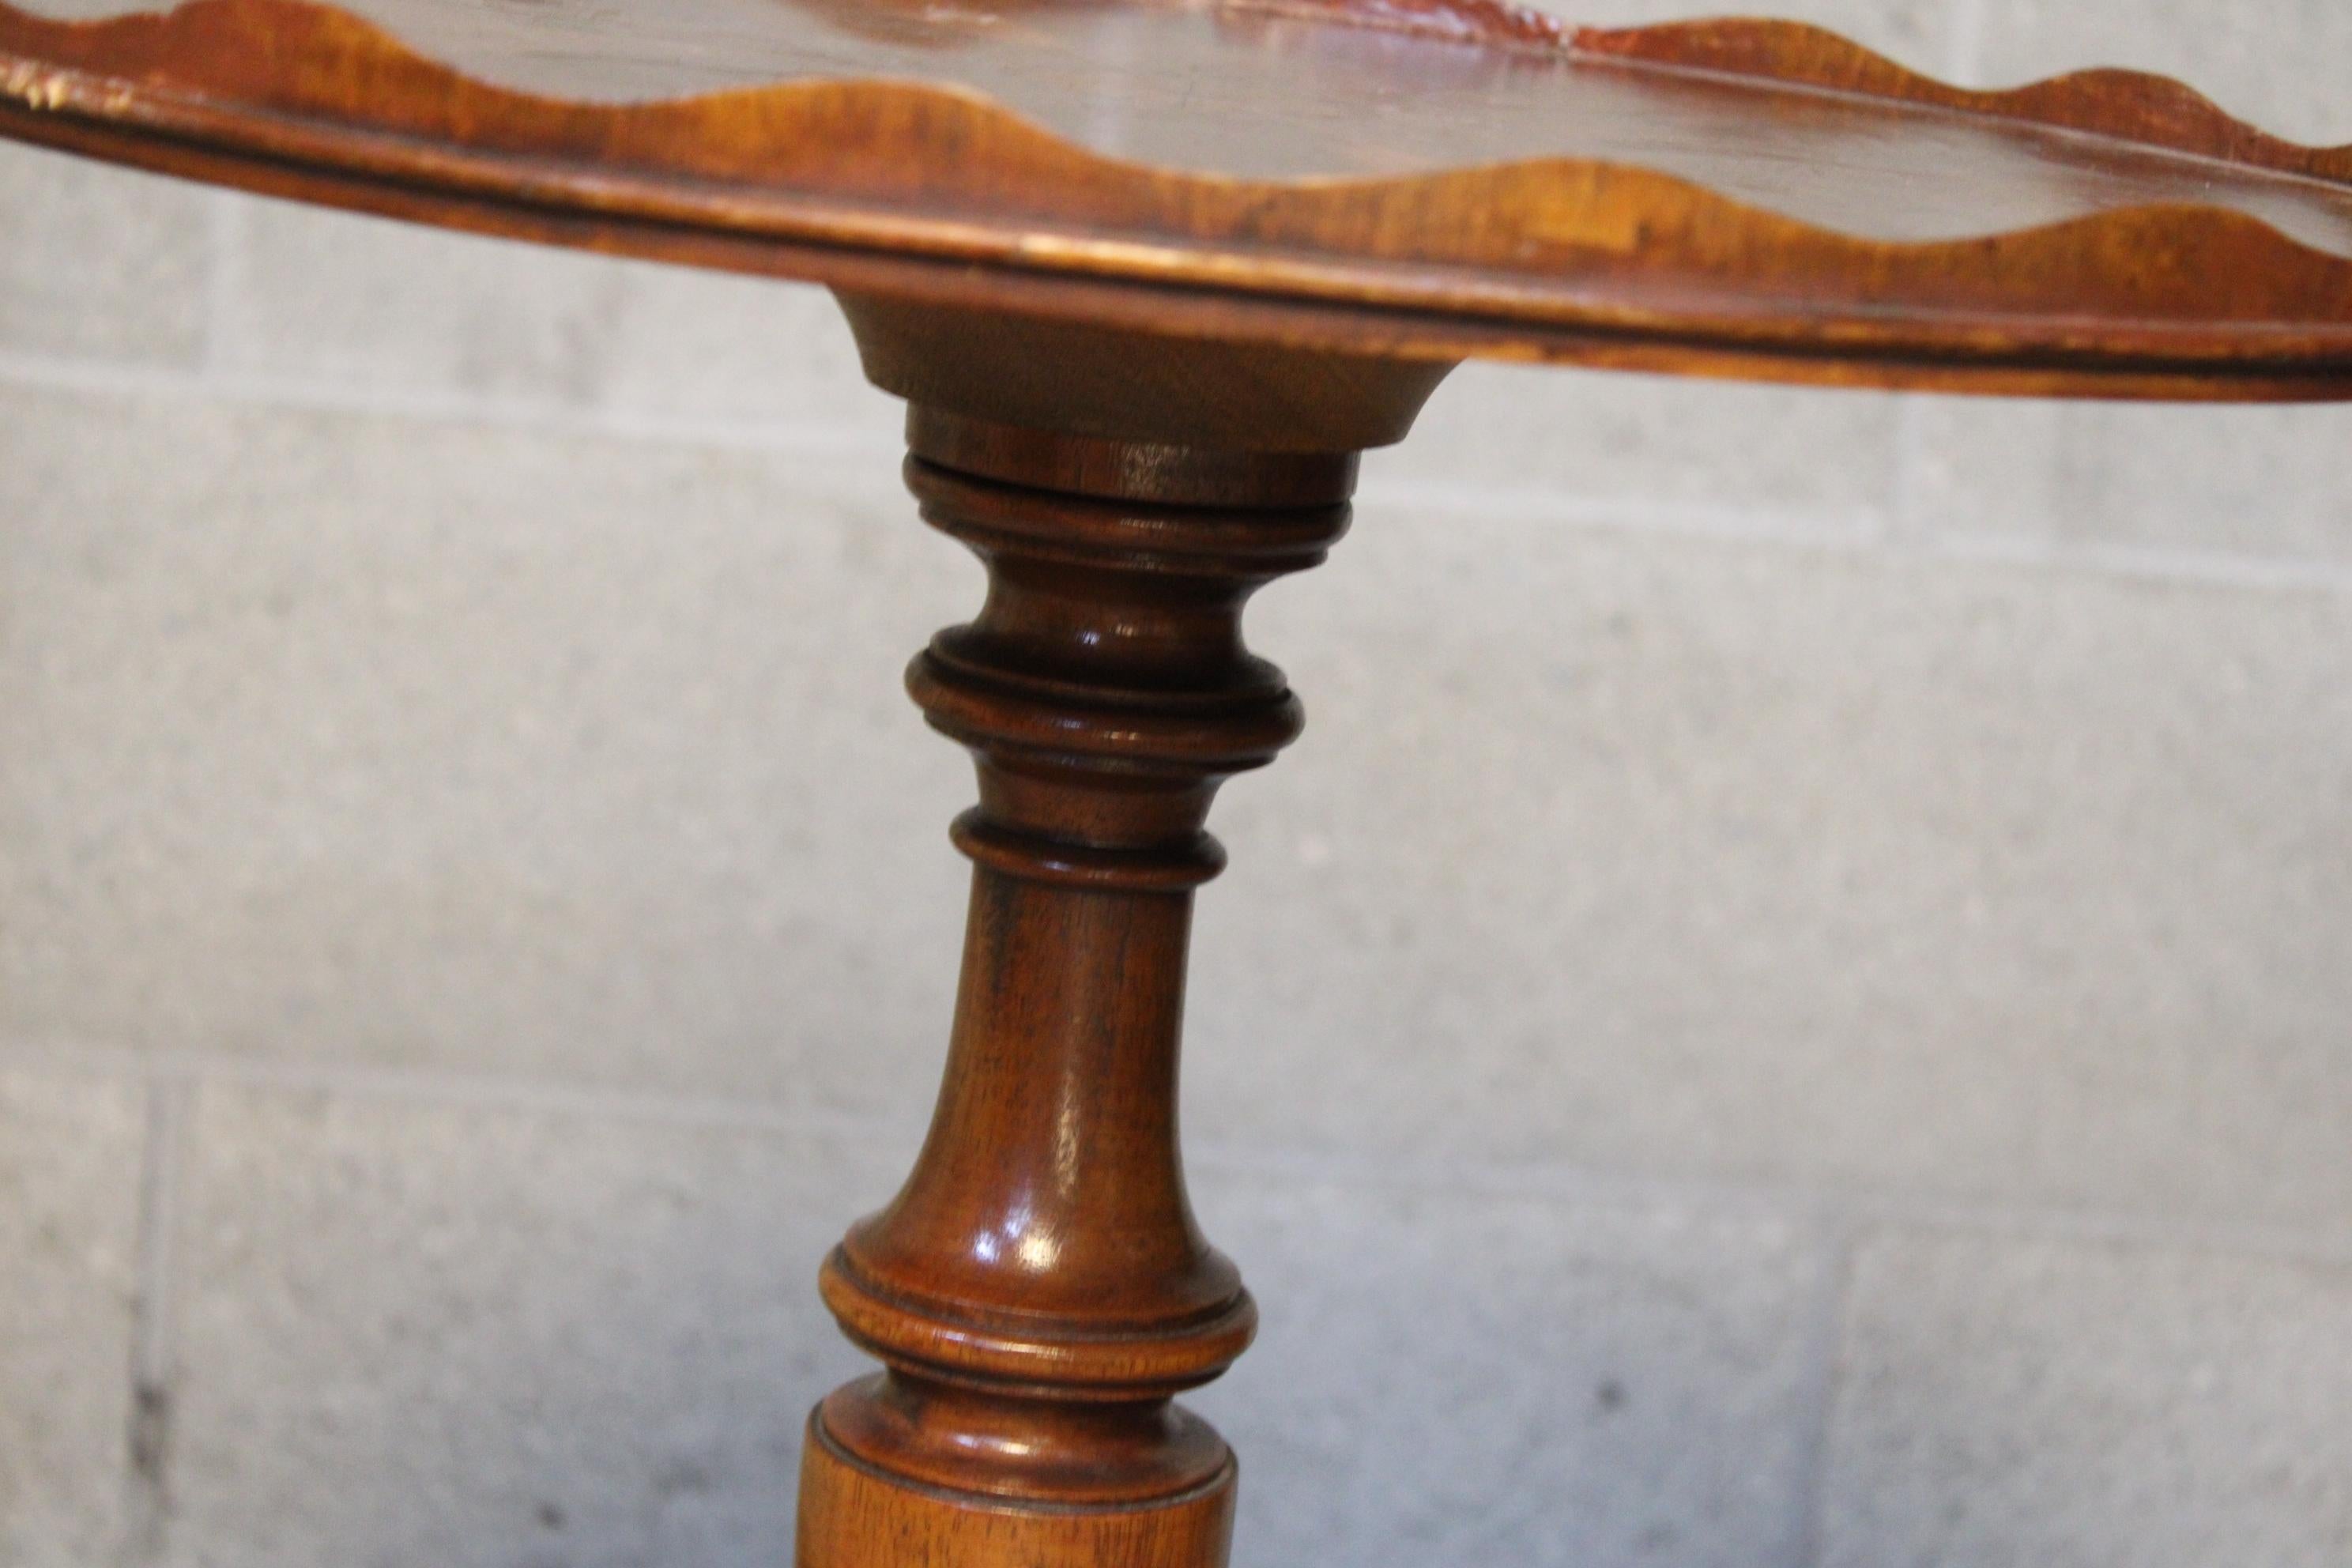 Hand-Crafted Sheraton Revival Hardwood Tripod Side Table, 19th century small coffee table